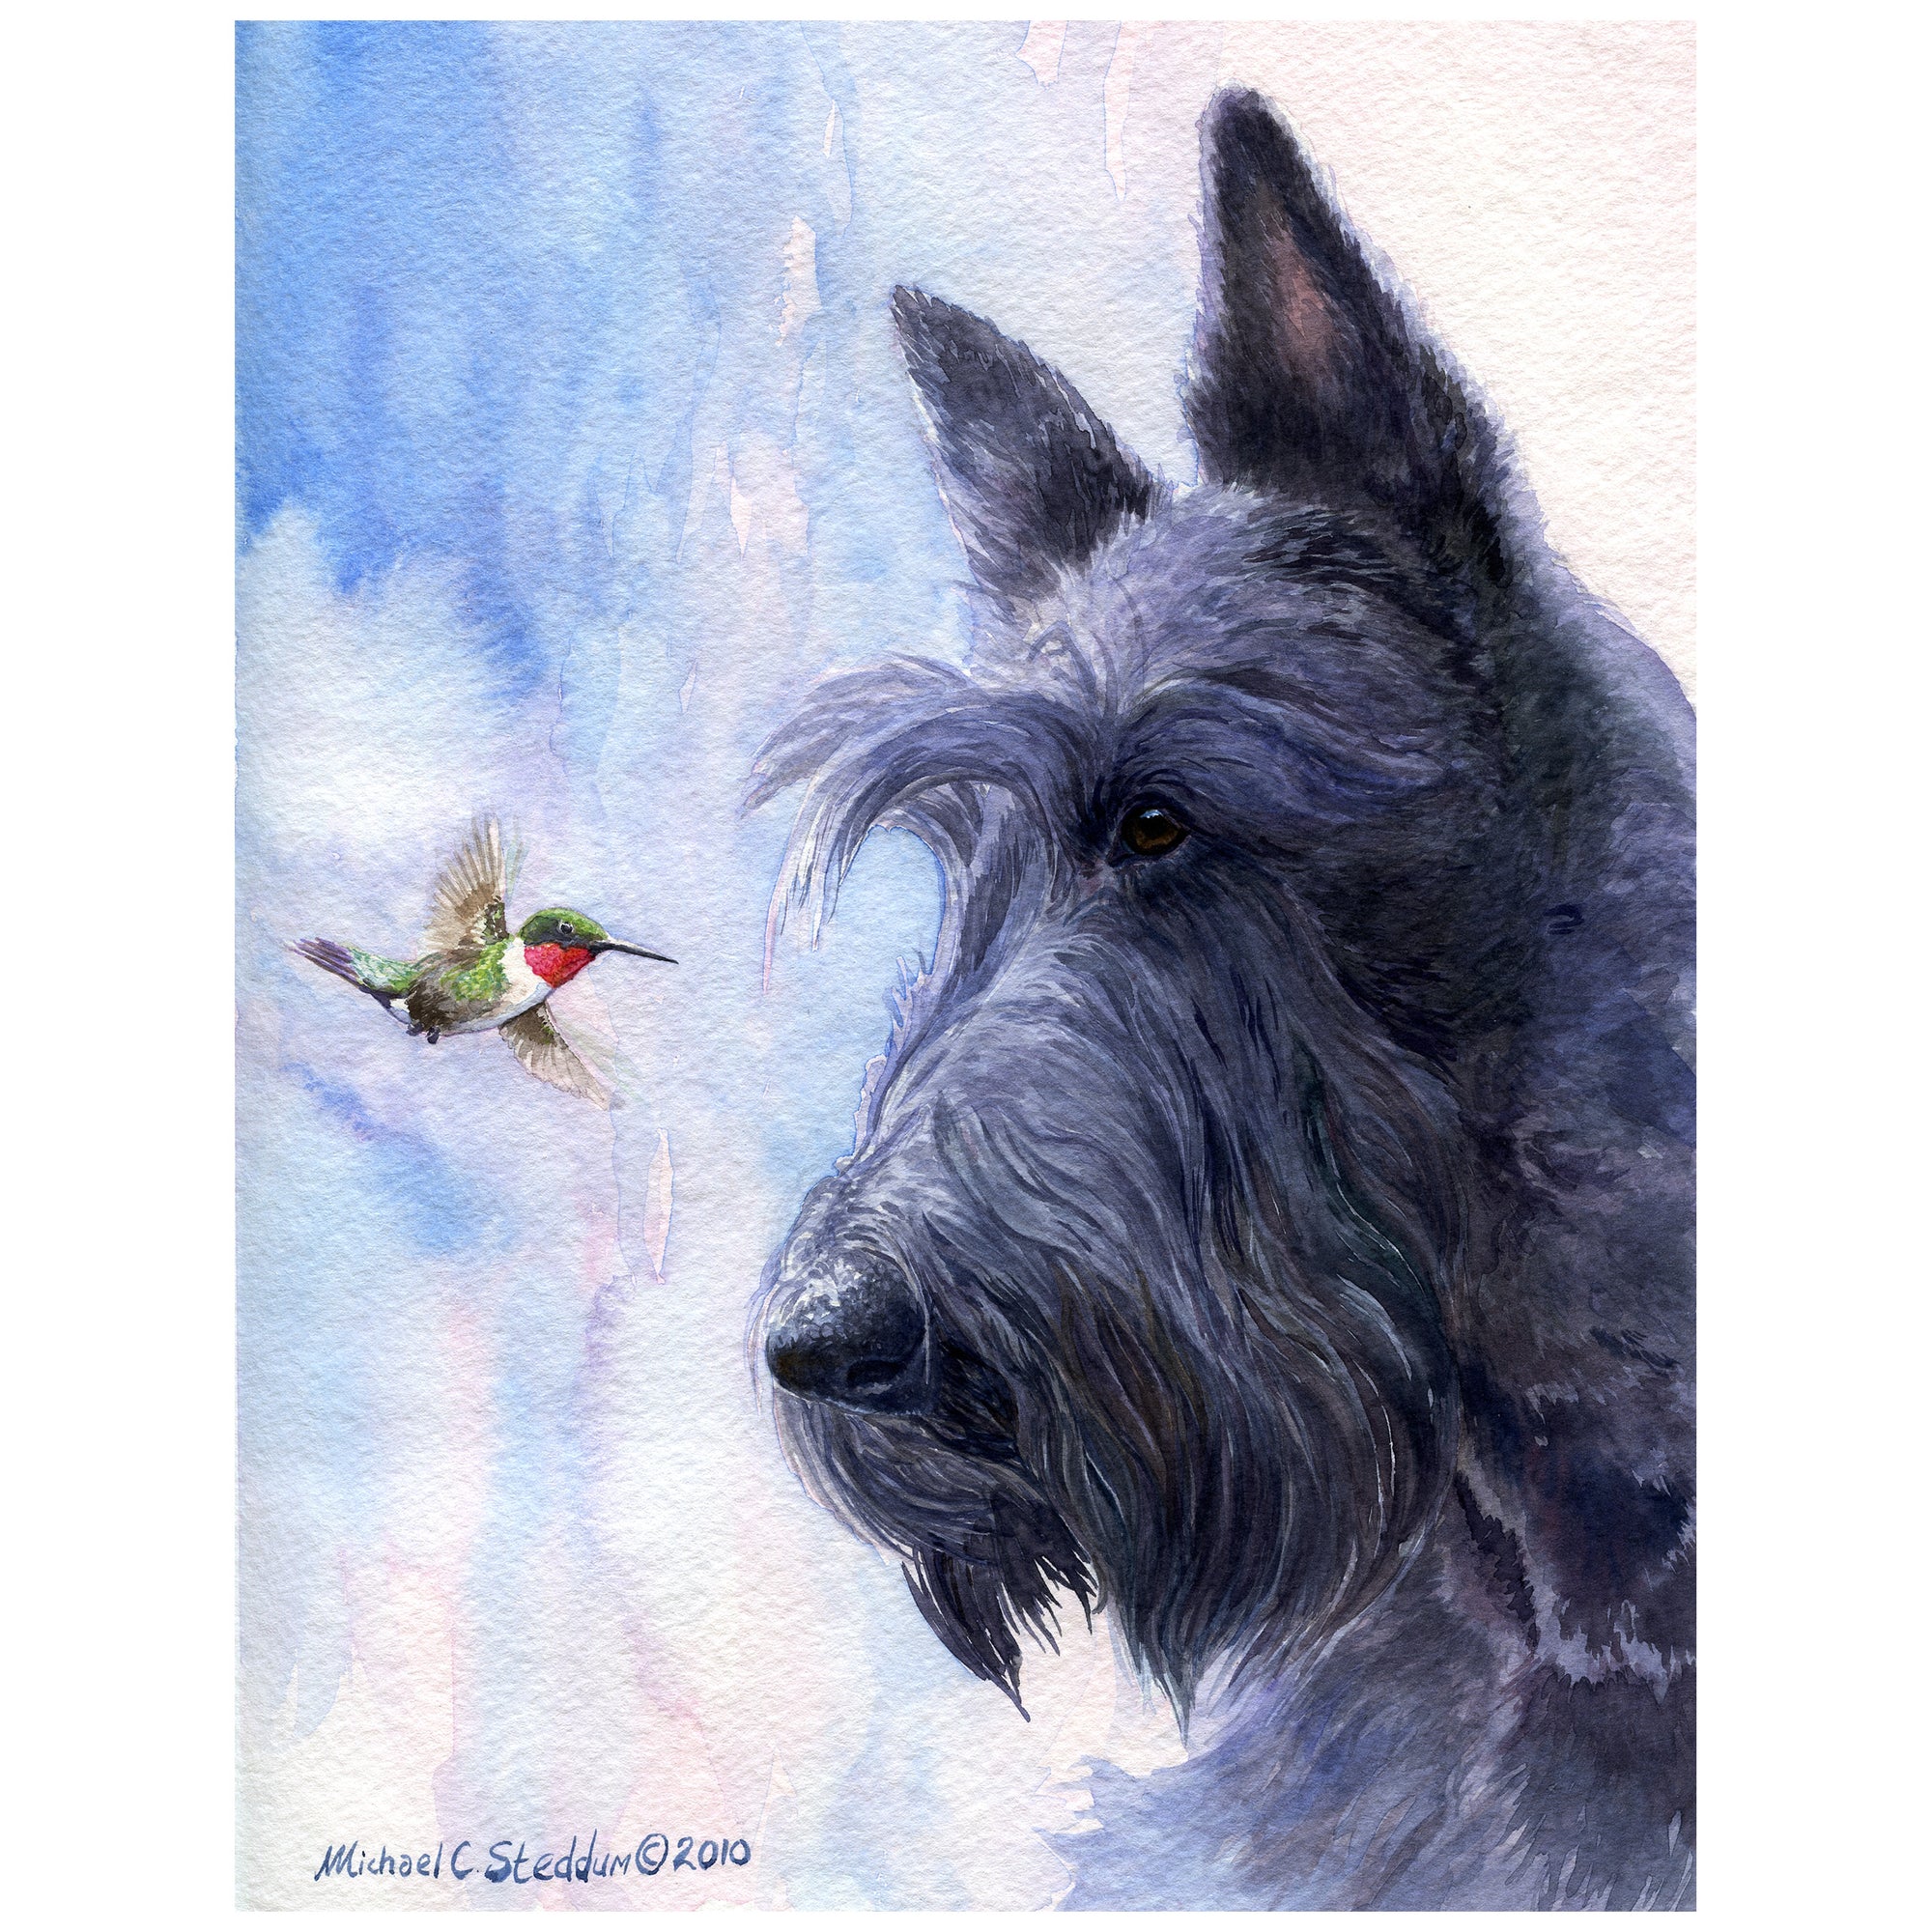 "My Turf" A Scottish Terrier Art Reproduction Print by Michael Steddum - Limited Edition Signed and Numbered Scottish Terrier Art Print - Ideal for a Scottie Gift